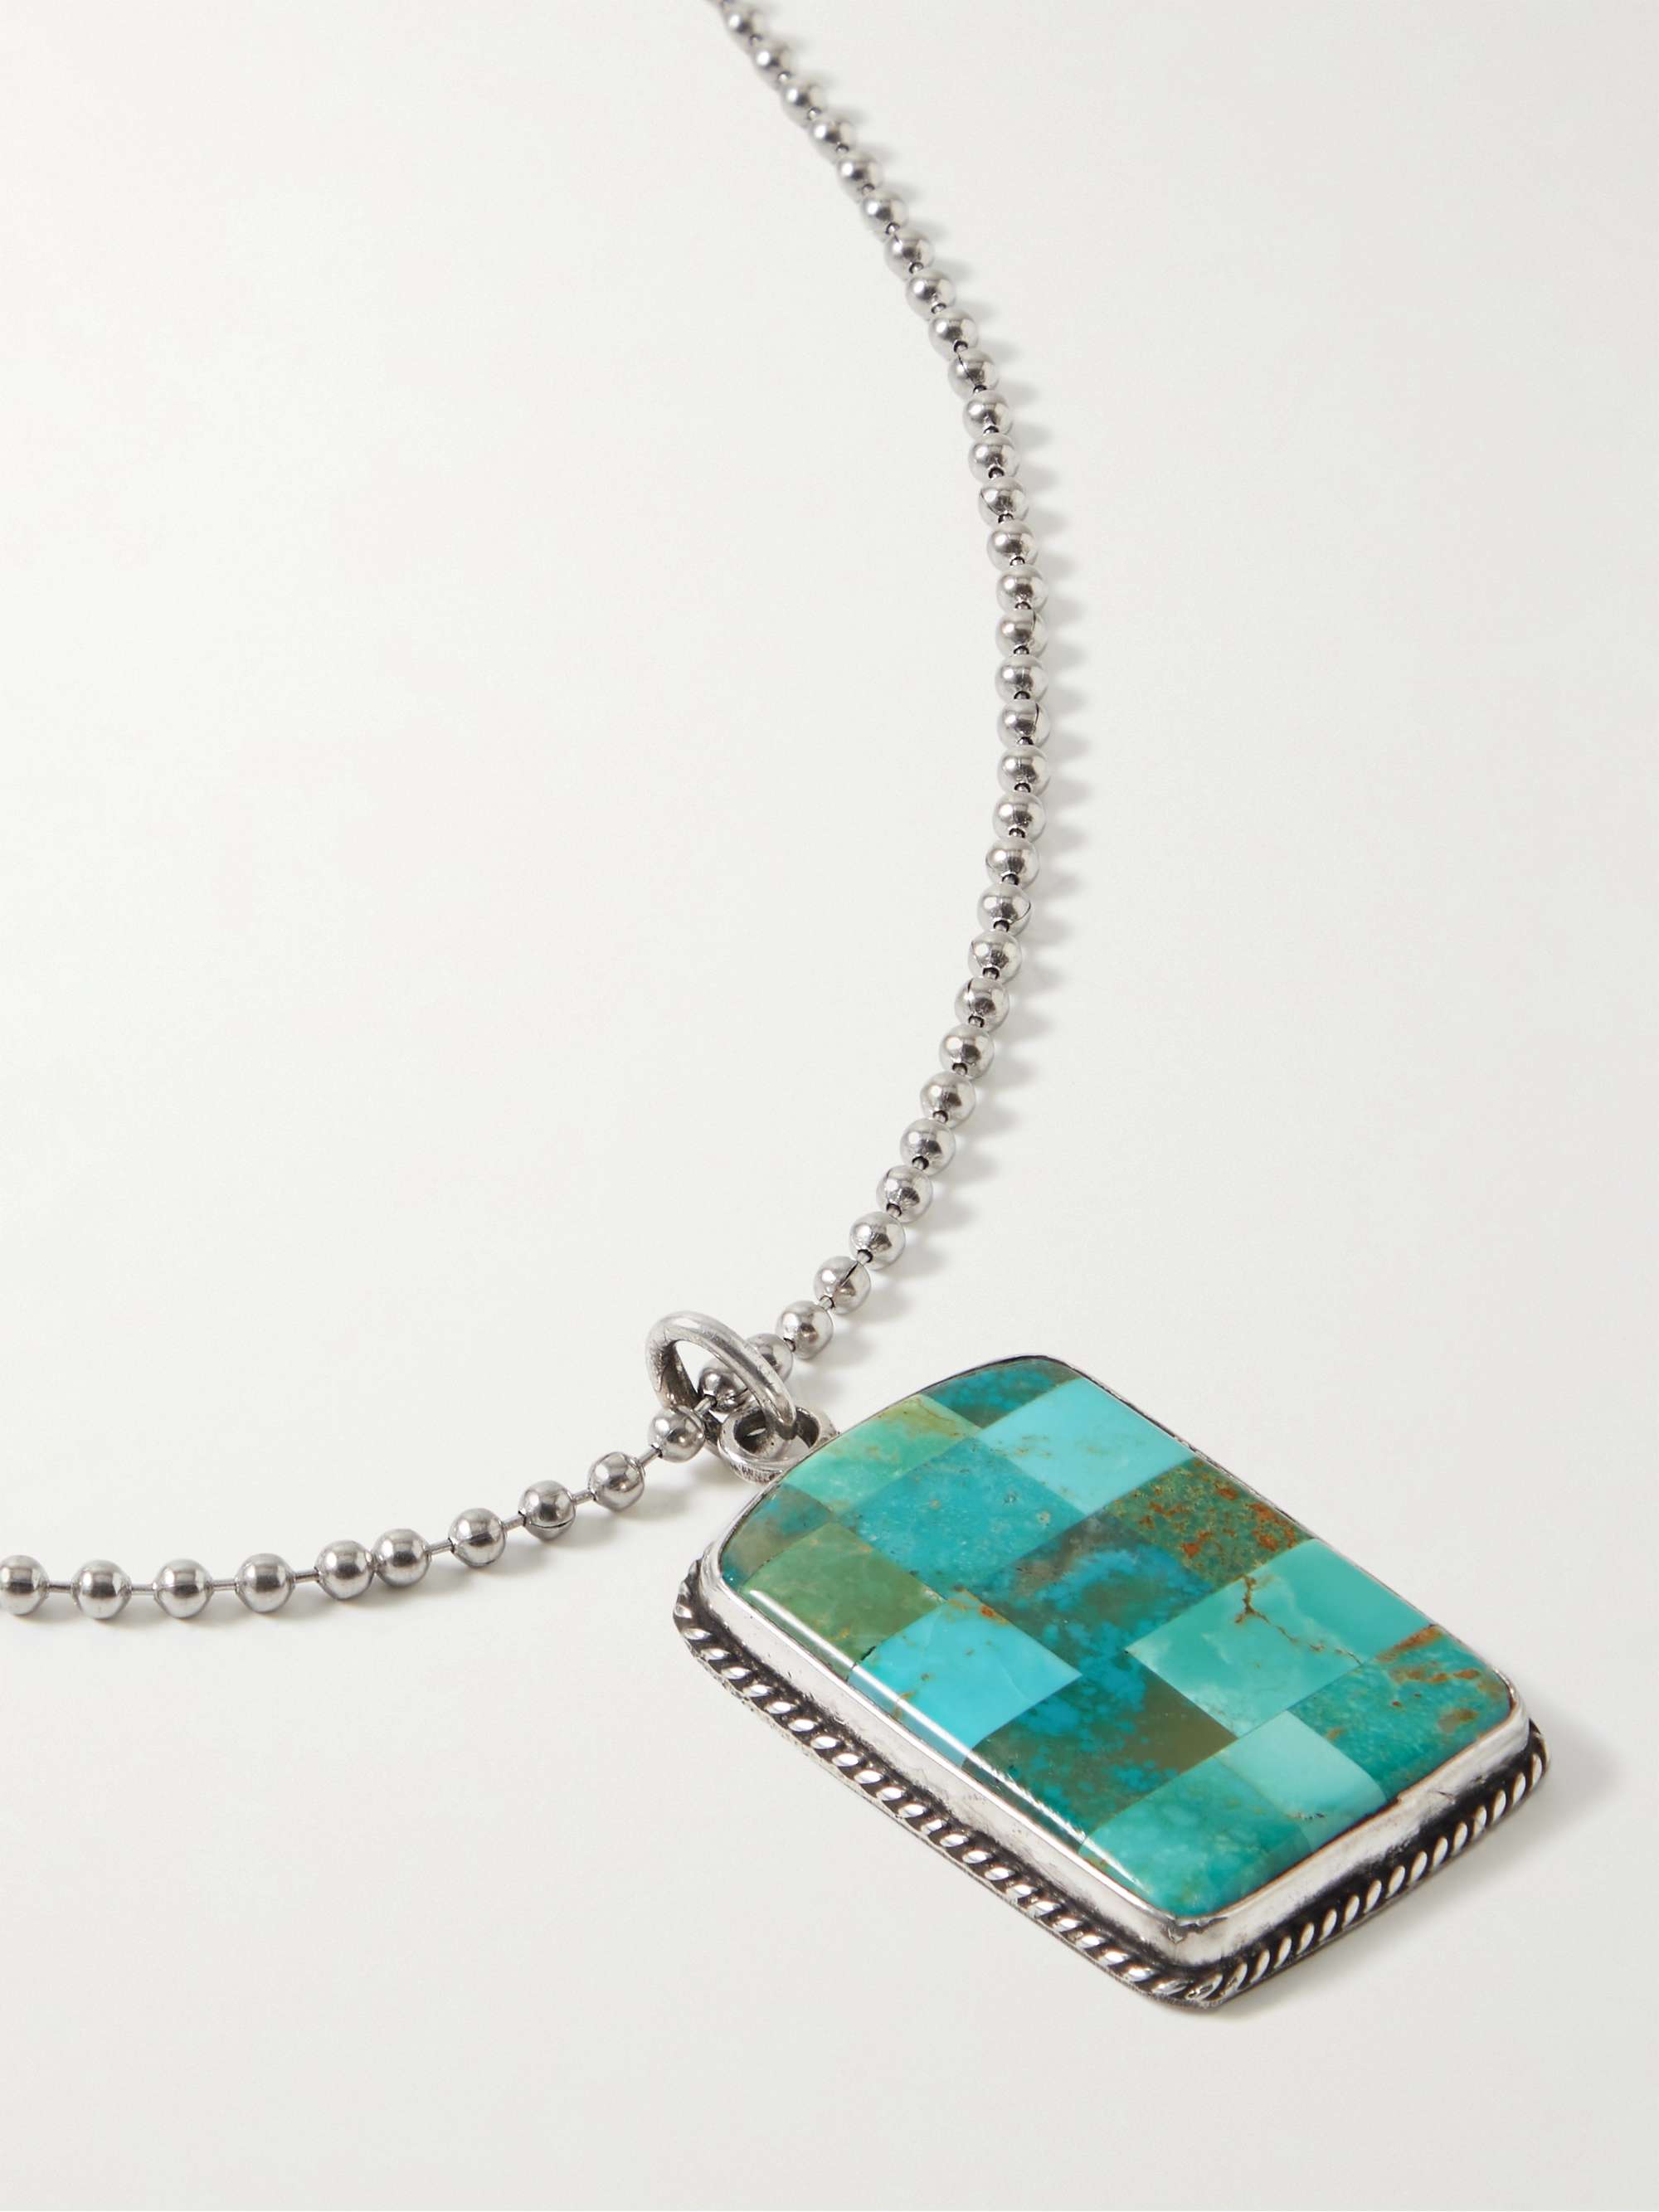 Silver Necklace with Square Turquoise Pendant – Nialaya